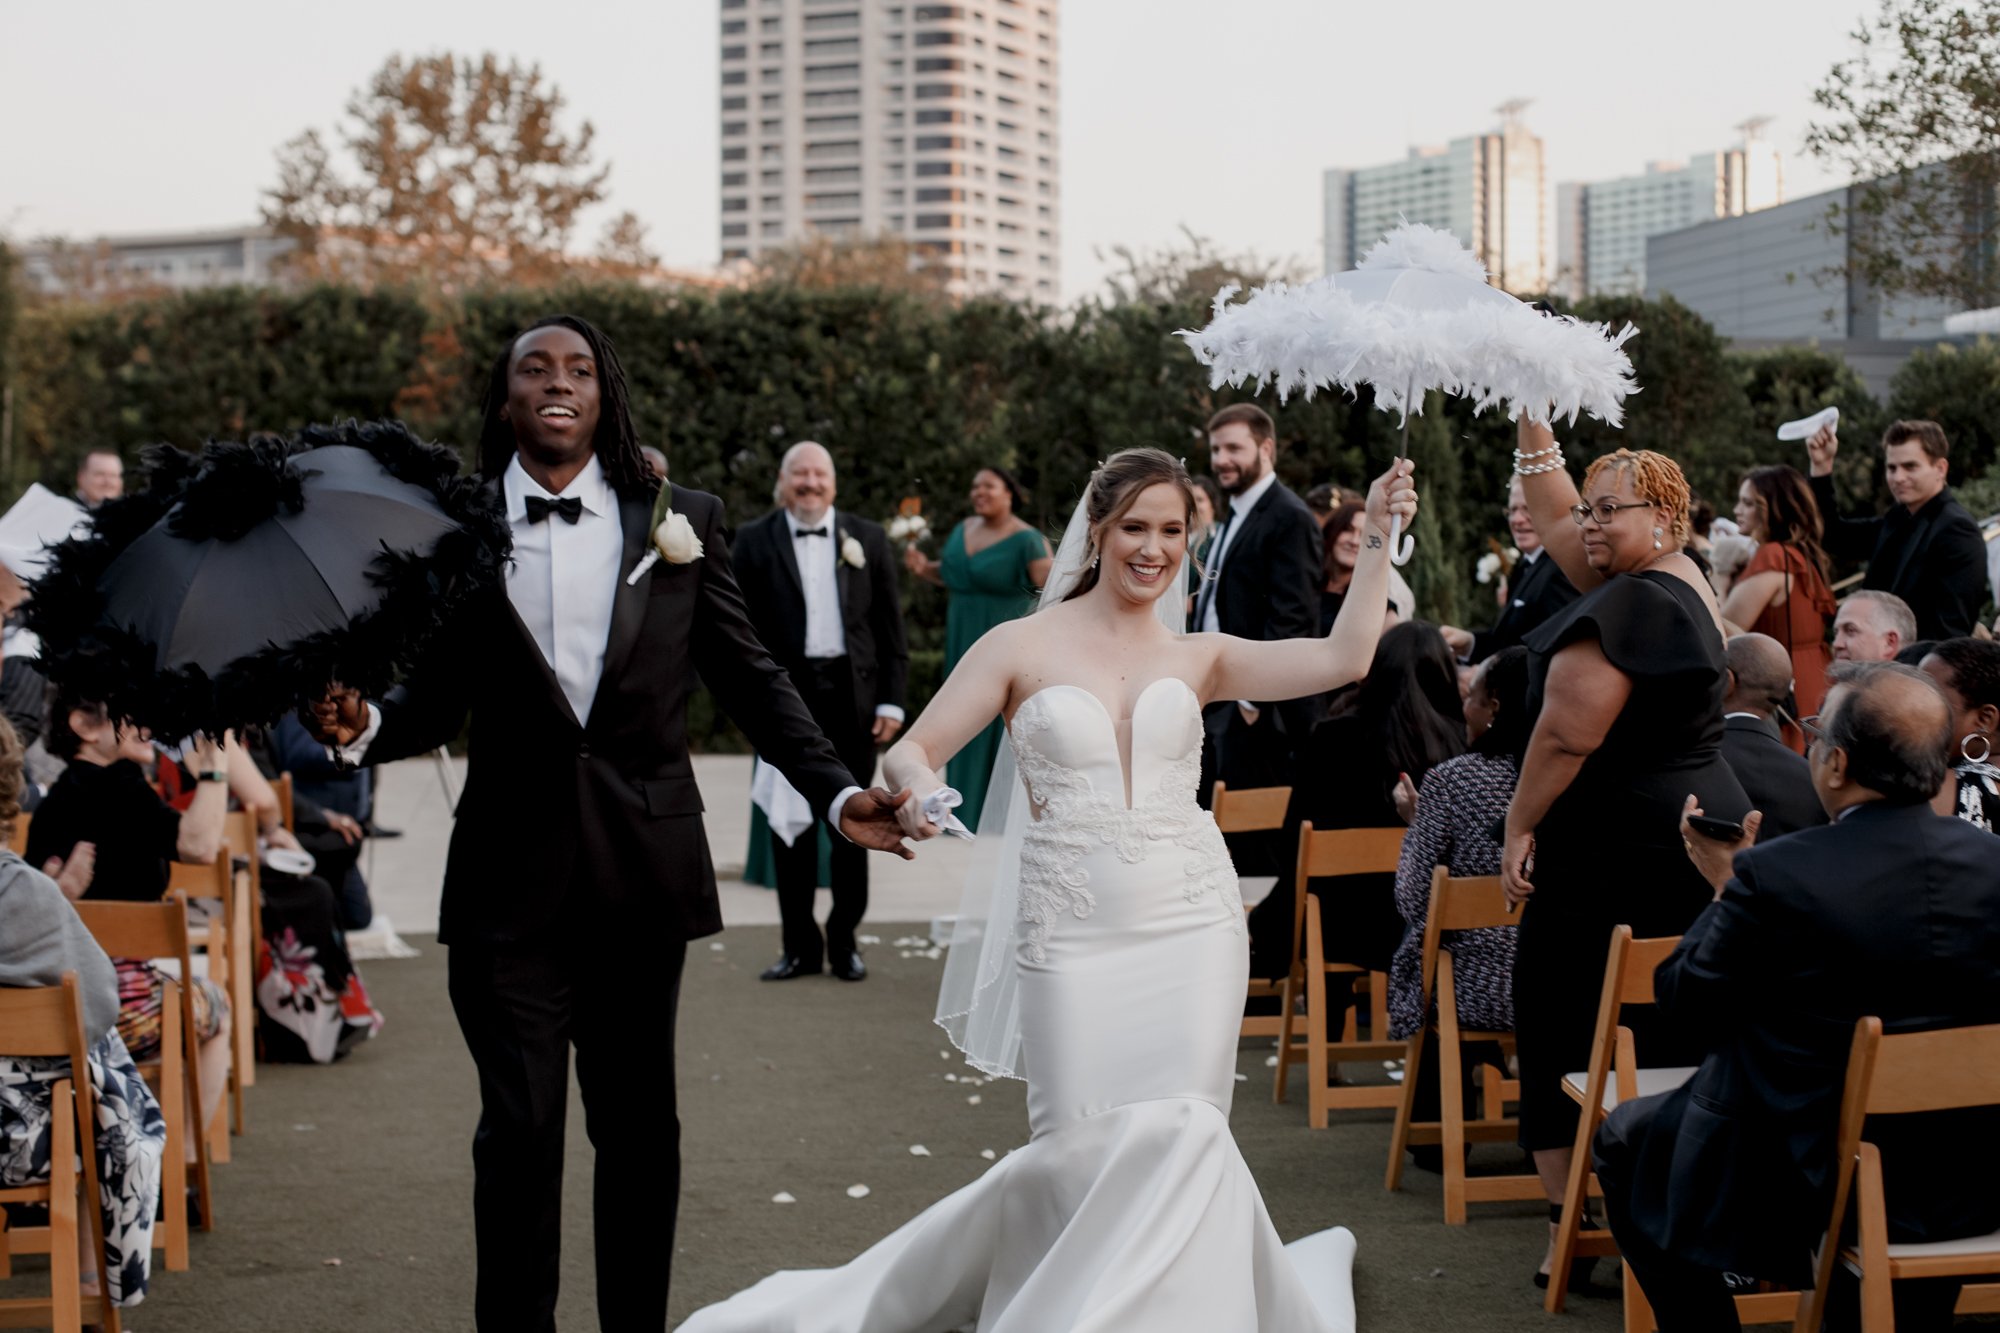 Bride an groom walking down the aisle with umbrellas. New Orleans Style Wedding at McGovern Centennial Gardens